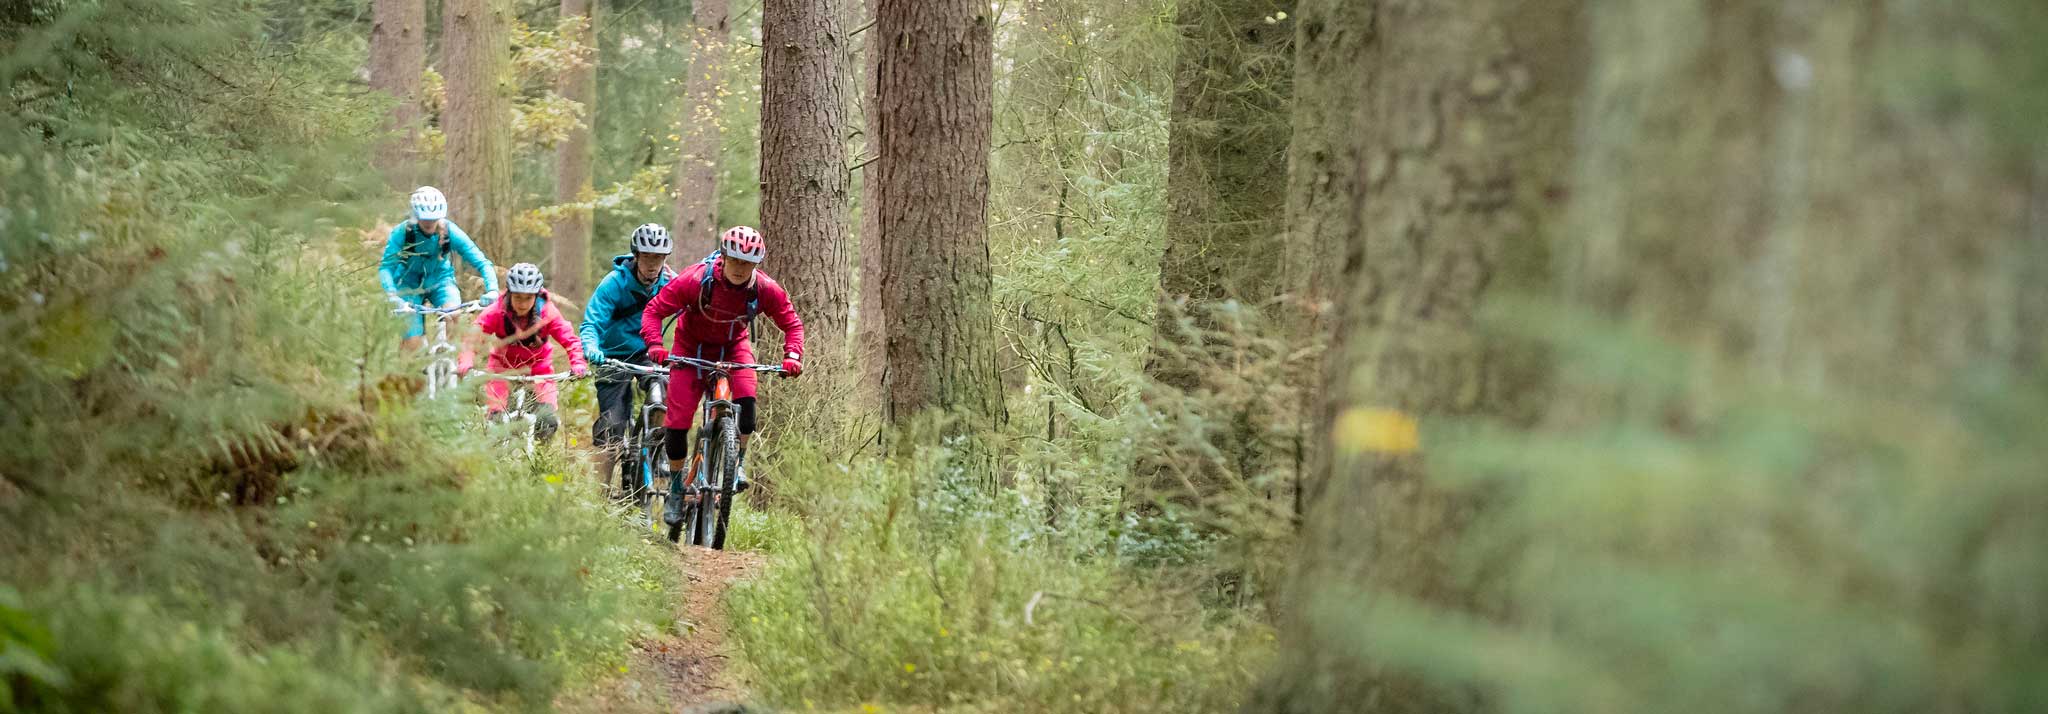 For riders heading down a woodland track on mountain bikes. Credit Russell Burton/NYMNPA